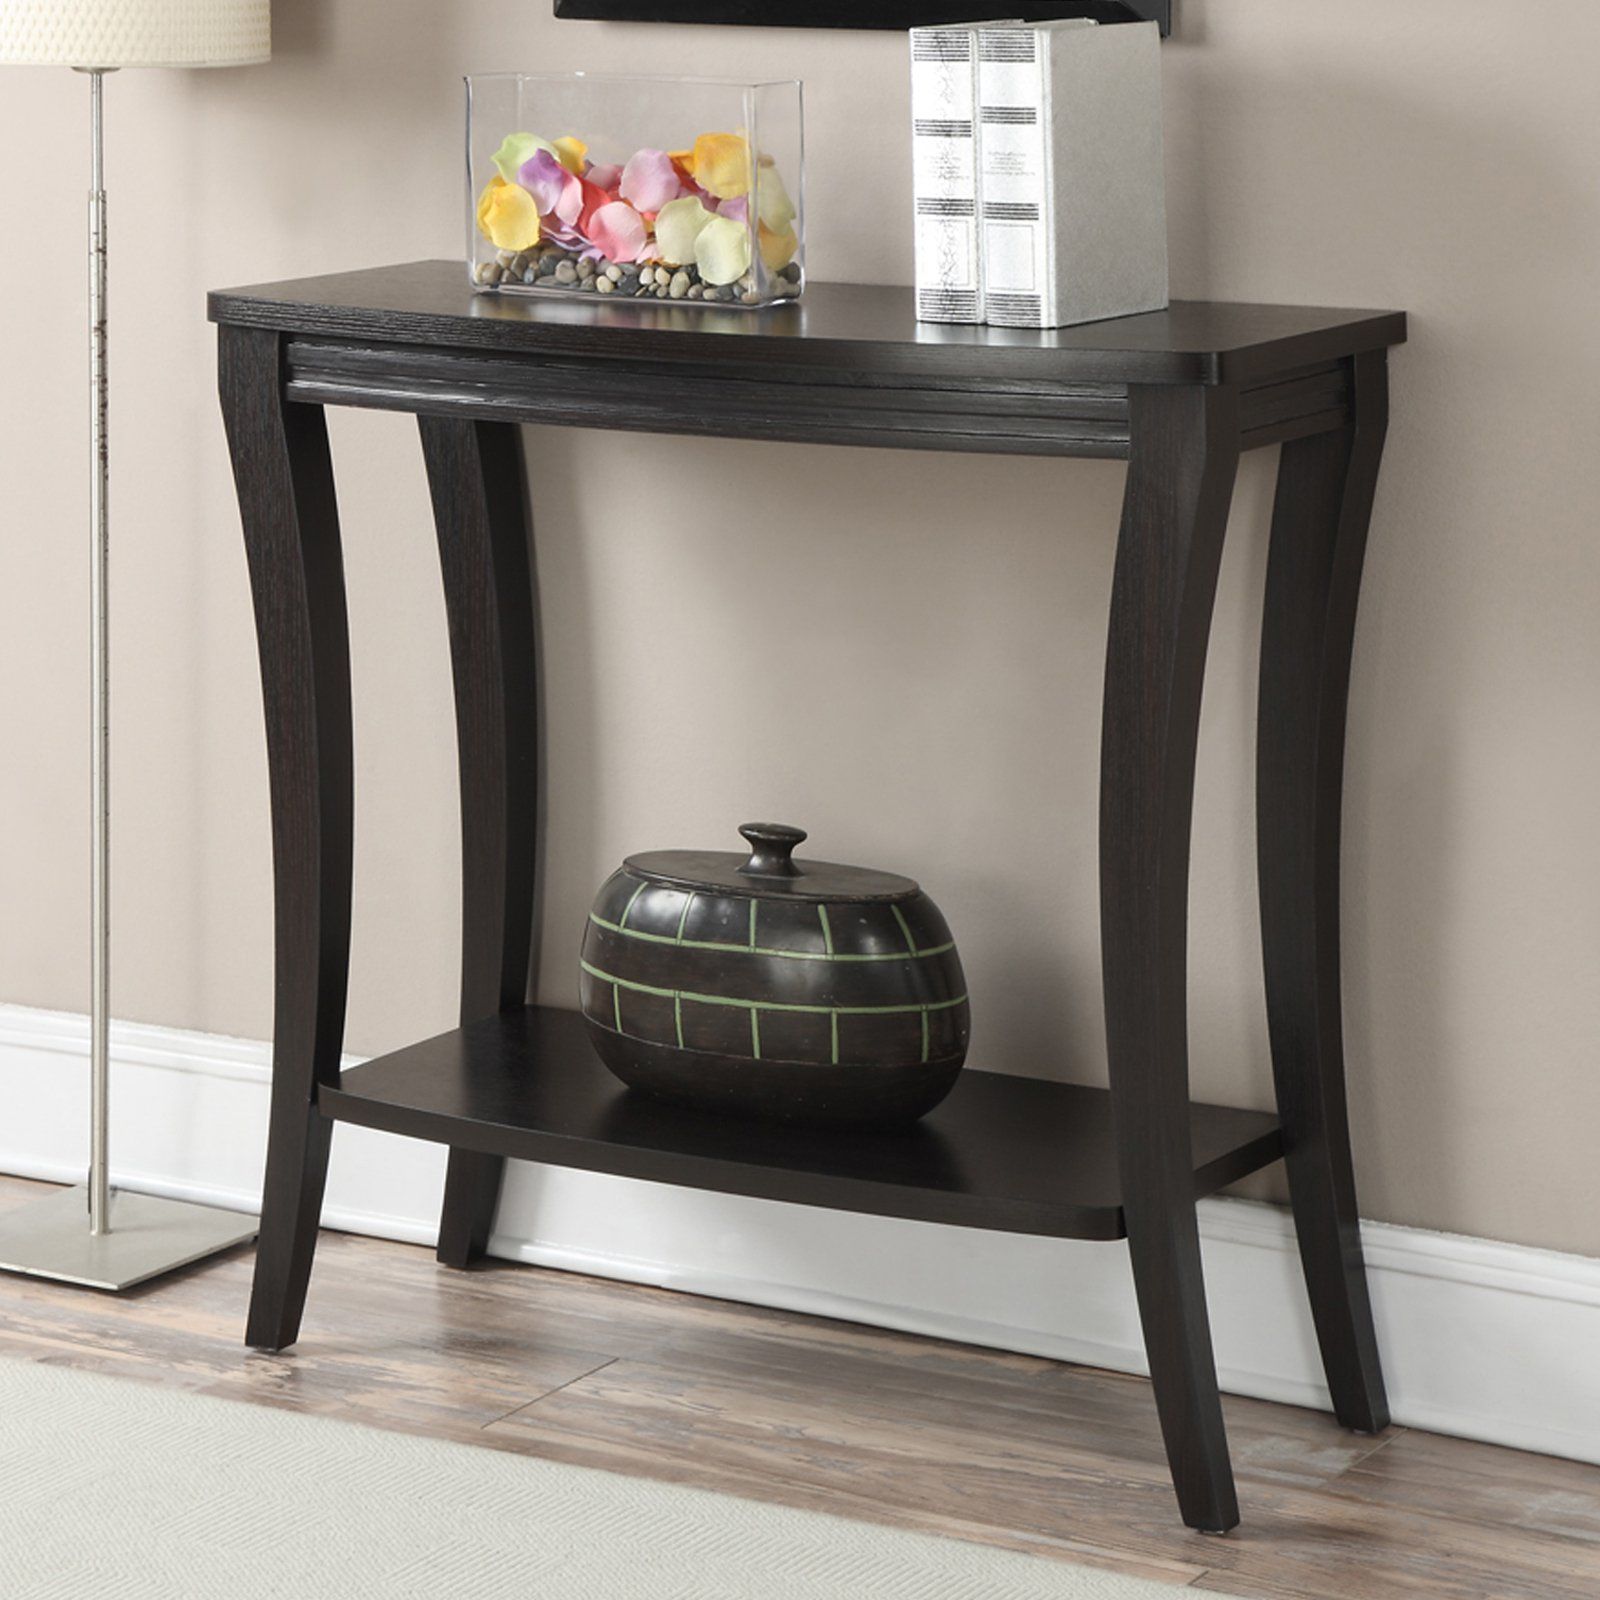 Convenience Concepts Newport Console Table With Shelf, Espresso Intended For 3 Piece Shelf Console Tables (View 16 of 20)